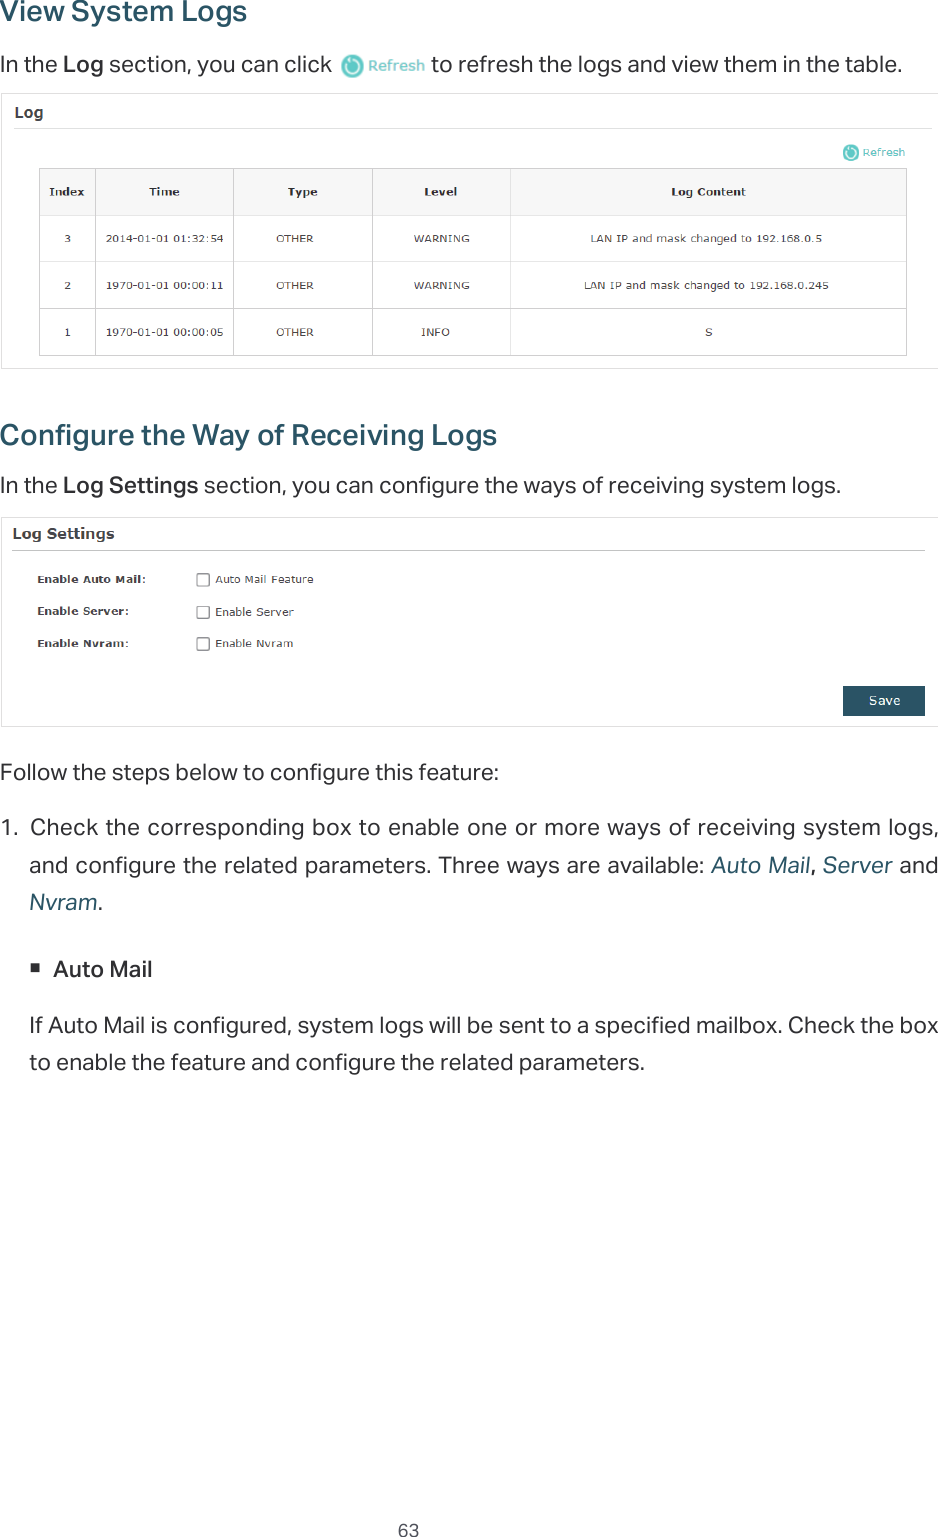  63View System LogsIn the Log section, you can click   to refresh the logs and view them in the table.Configure the Way of Receiving LogsIn the Log Settings section, you can configure the ways of receiving system logs.Follow the steps below to configure this feature:1. Check the corresponding box to enable one or more ways of receiving system logs, and configure the related parameters. Three ways are available: Auto Mail, Server and Nvram. Auto MailIf Auto Mail is configured, system logs will be sent to a specified mailbox. Check the box to enable the feature and configure the related parameters.